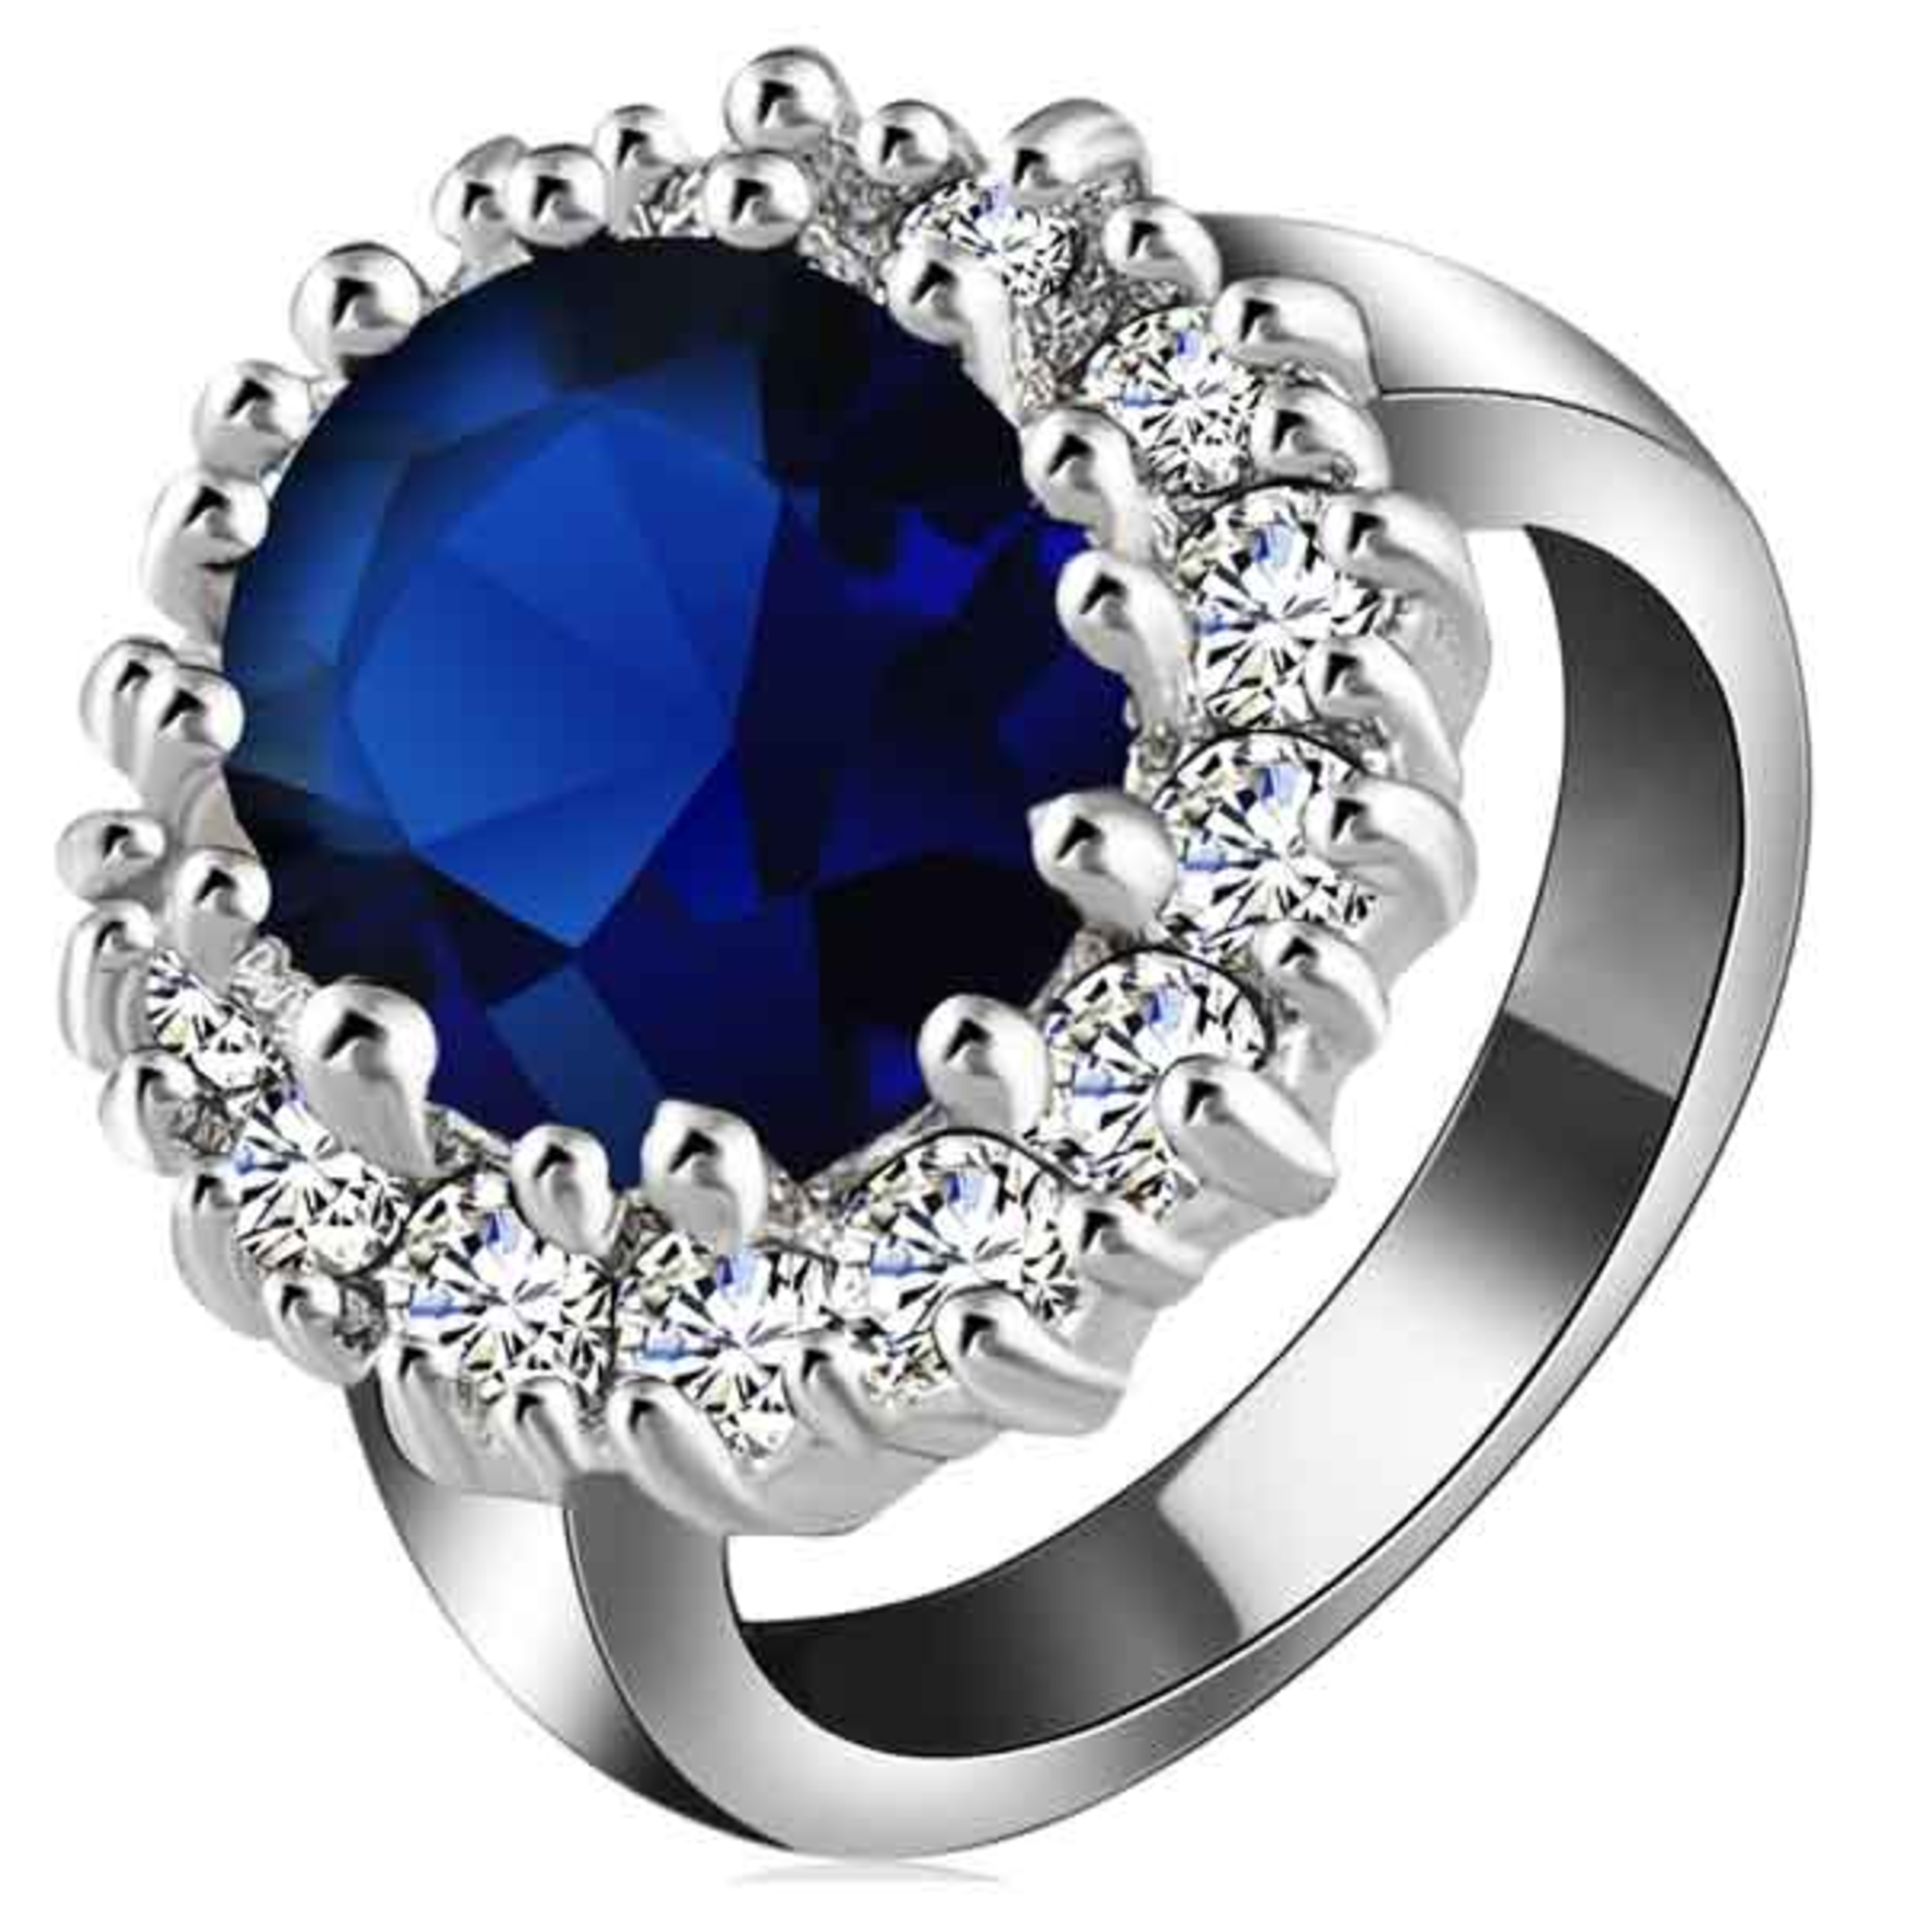 V Brand New Platinum Plated Large Blue Stone Ring X 2 YOUR BID PRICE TO BE MULTIPLIED BY TWO